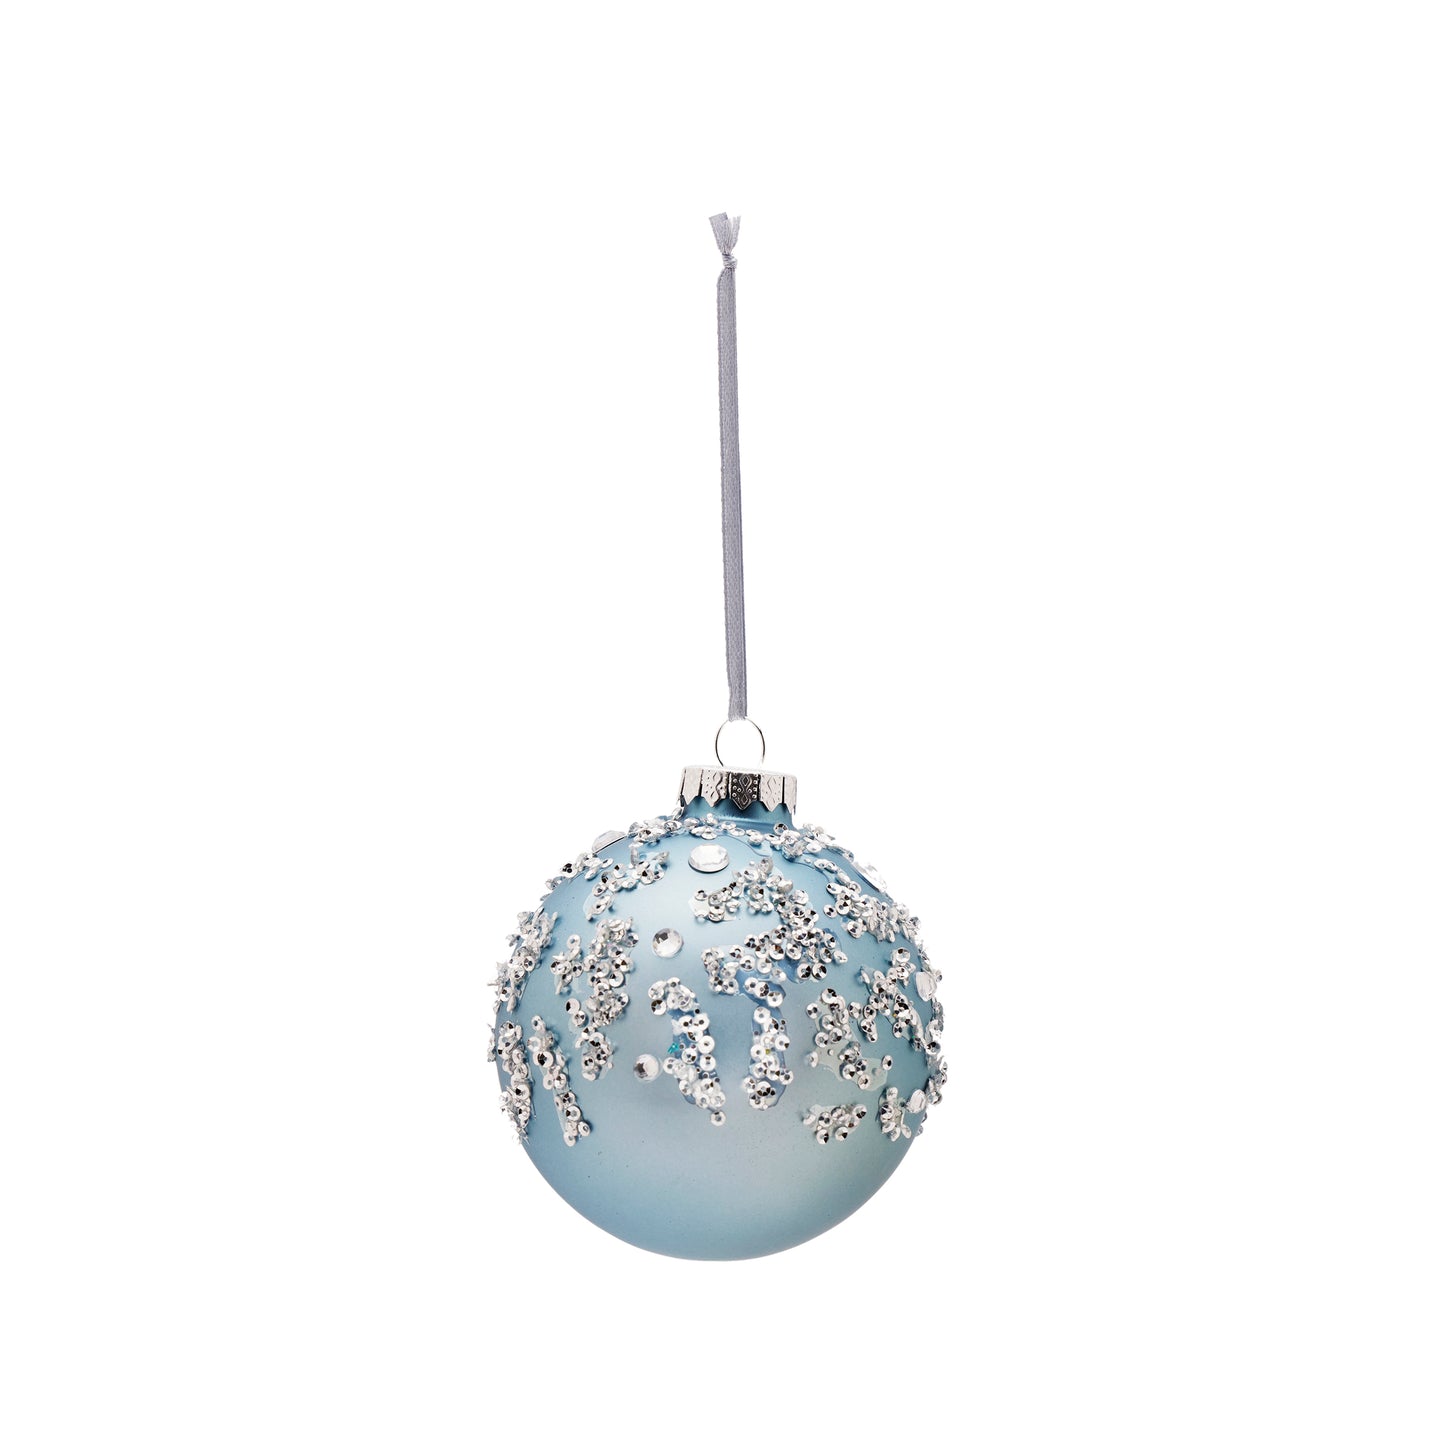 Waltz of the Snowflakes Ornaments, Set of 3 by Palmero Natale